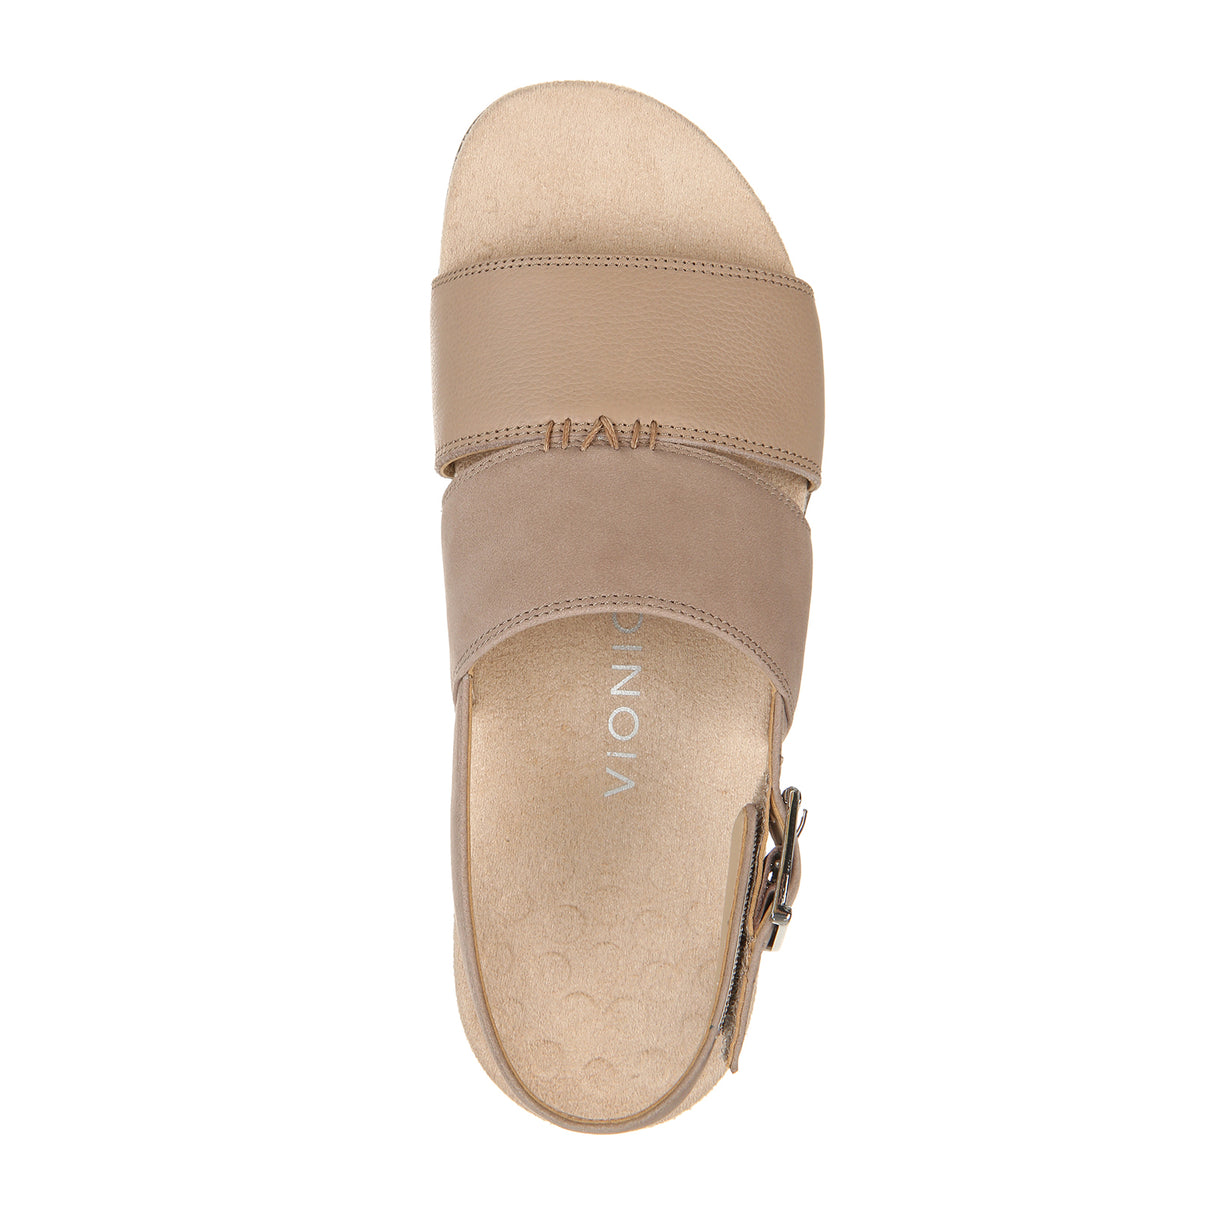 Vionic Morro (Women) - Taupe Leather Sandals - Backstrap - The Heel Shoe Fitters